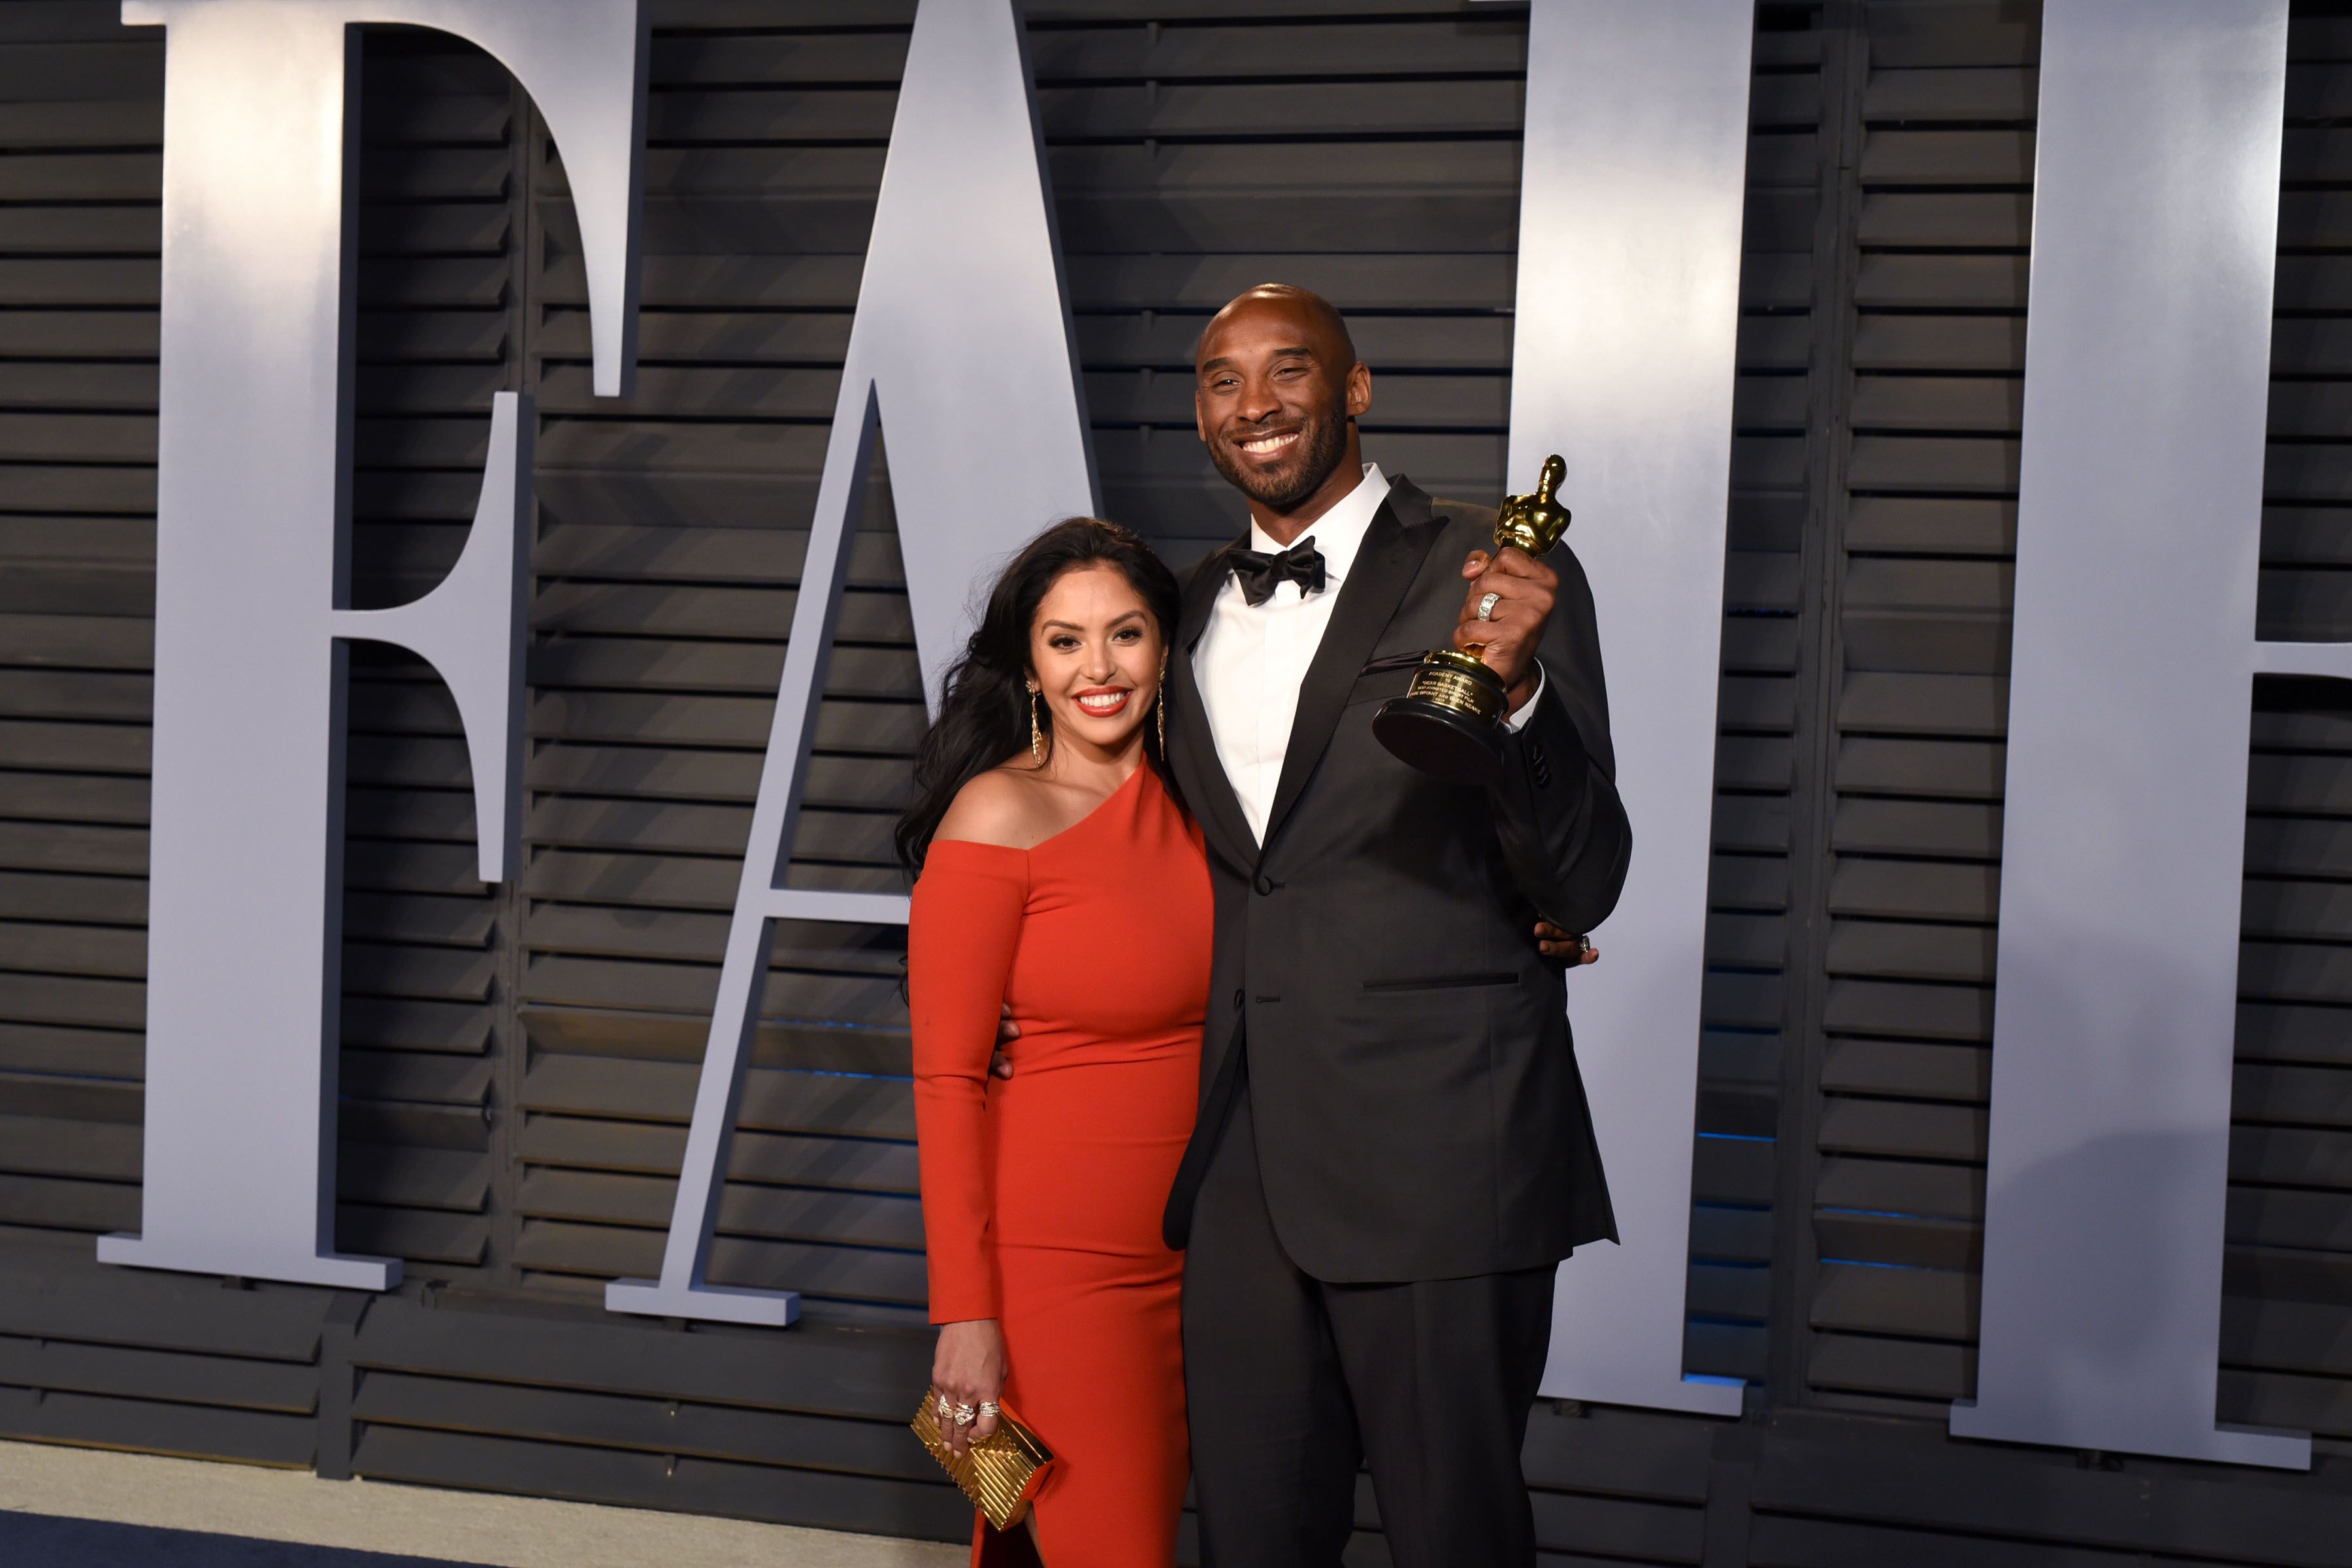 Vanessa Bryant and late Kobe Bryant at 2018 Vanity Fair Oscar Party Hosted By Radhika Jones - Arrivals at Wallis Annenberg Center for the Performing Arts on March 4, 2018 in Beverly Hills, CA. | Photo: Getty Images